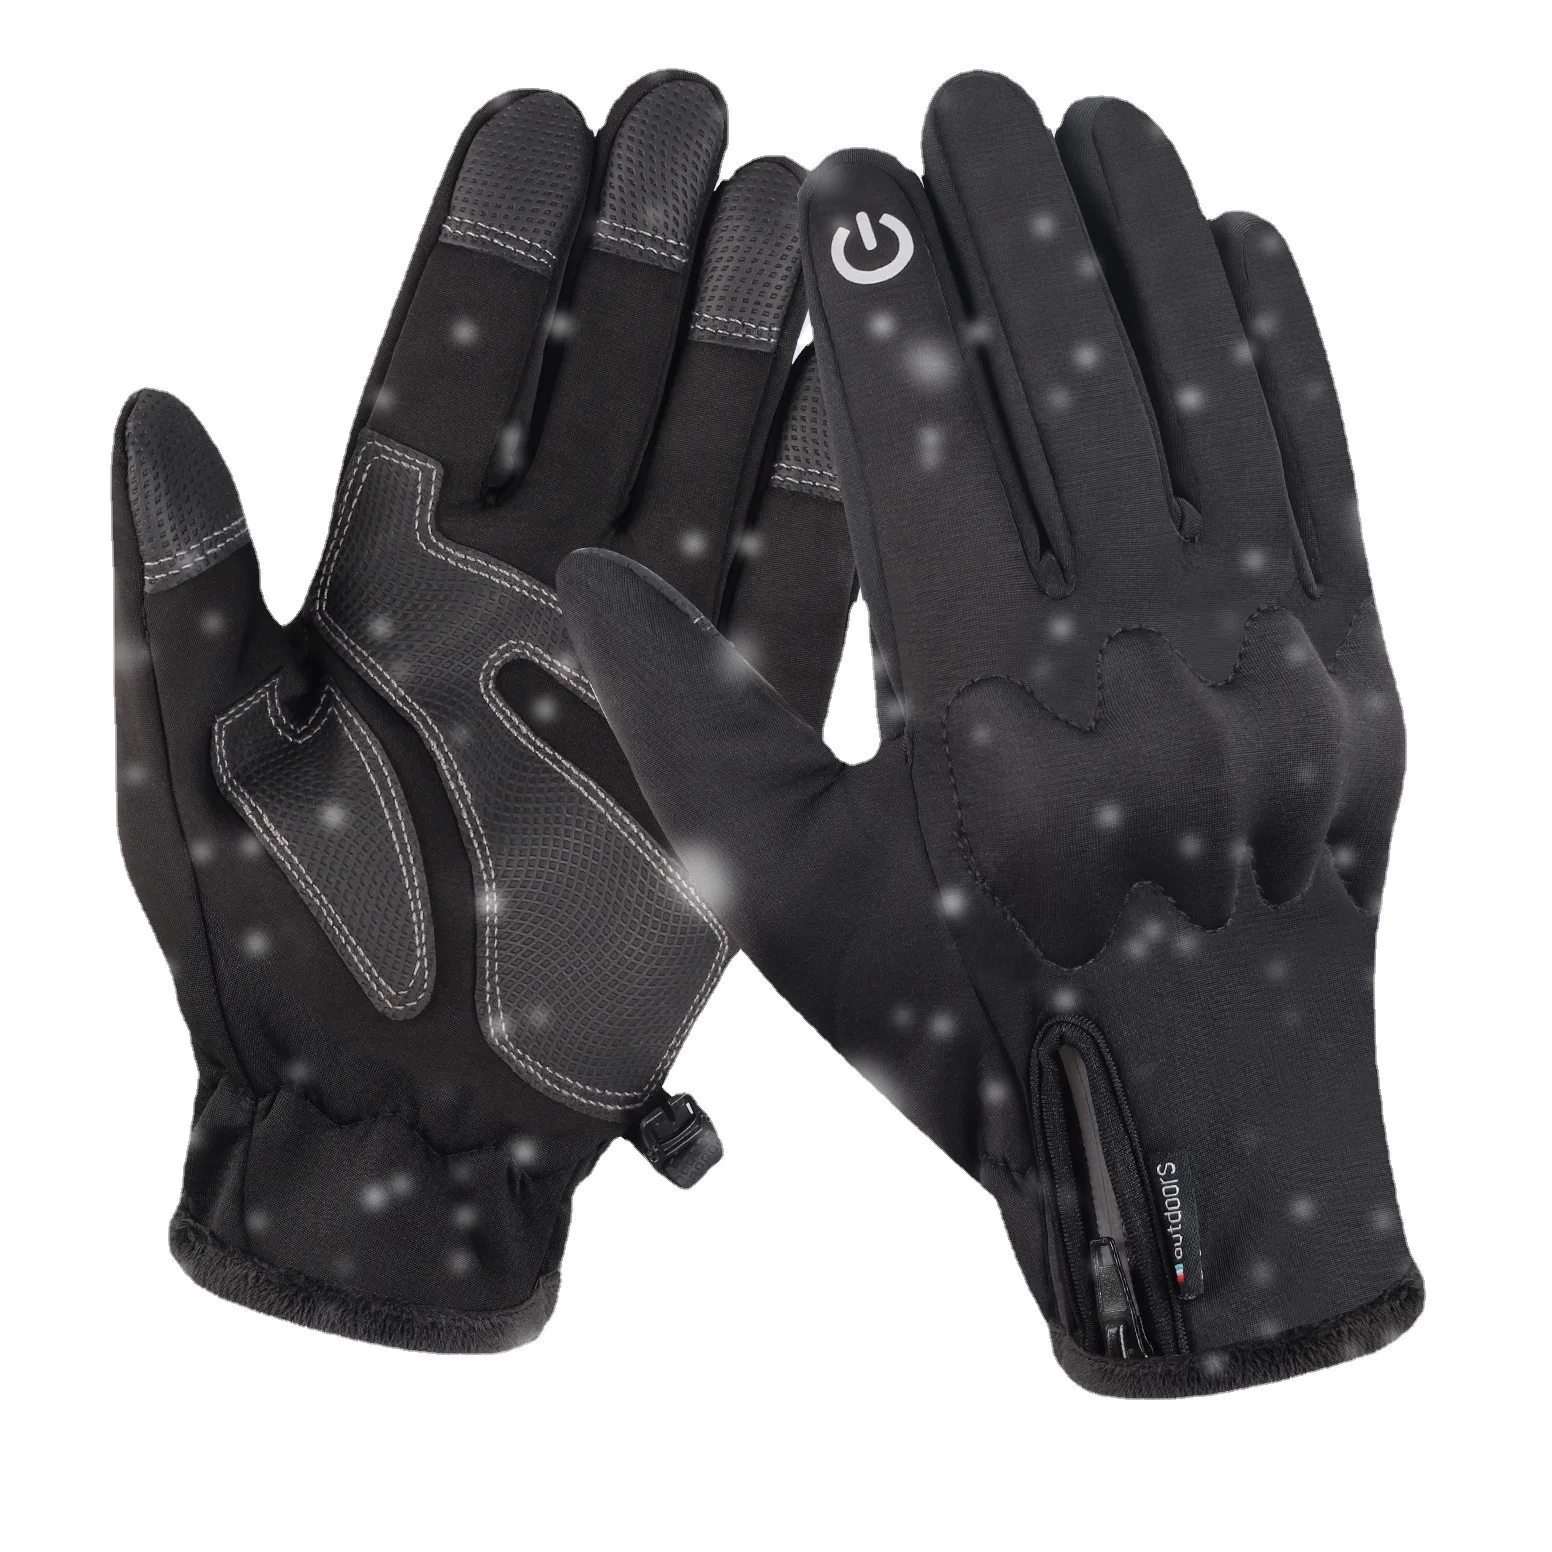 Winter Gloves Outdoor Cycling Skiing Waterproof Touch-Screen Anti-Skid Cycling Plus Velvet Windproof Cold Warm Gloves